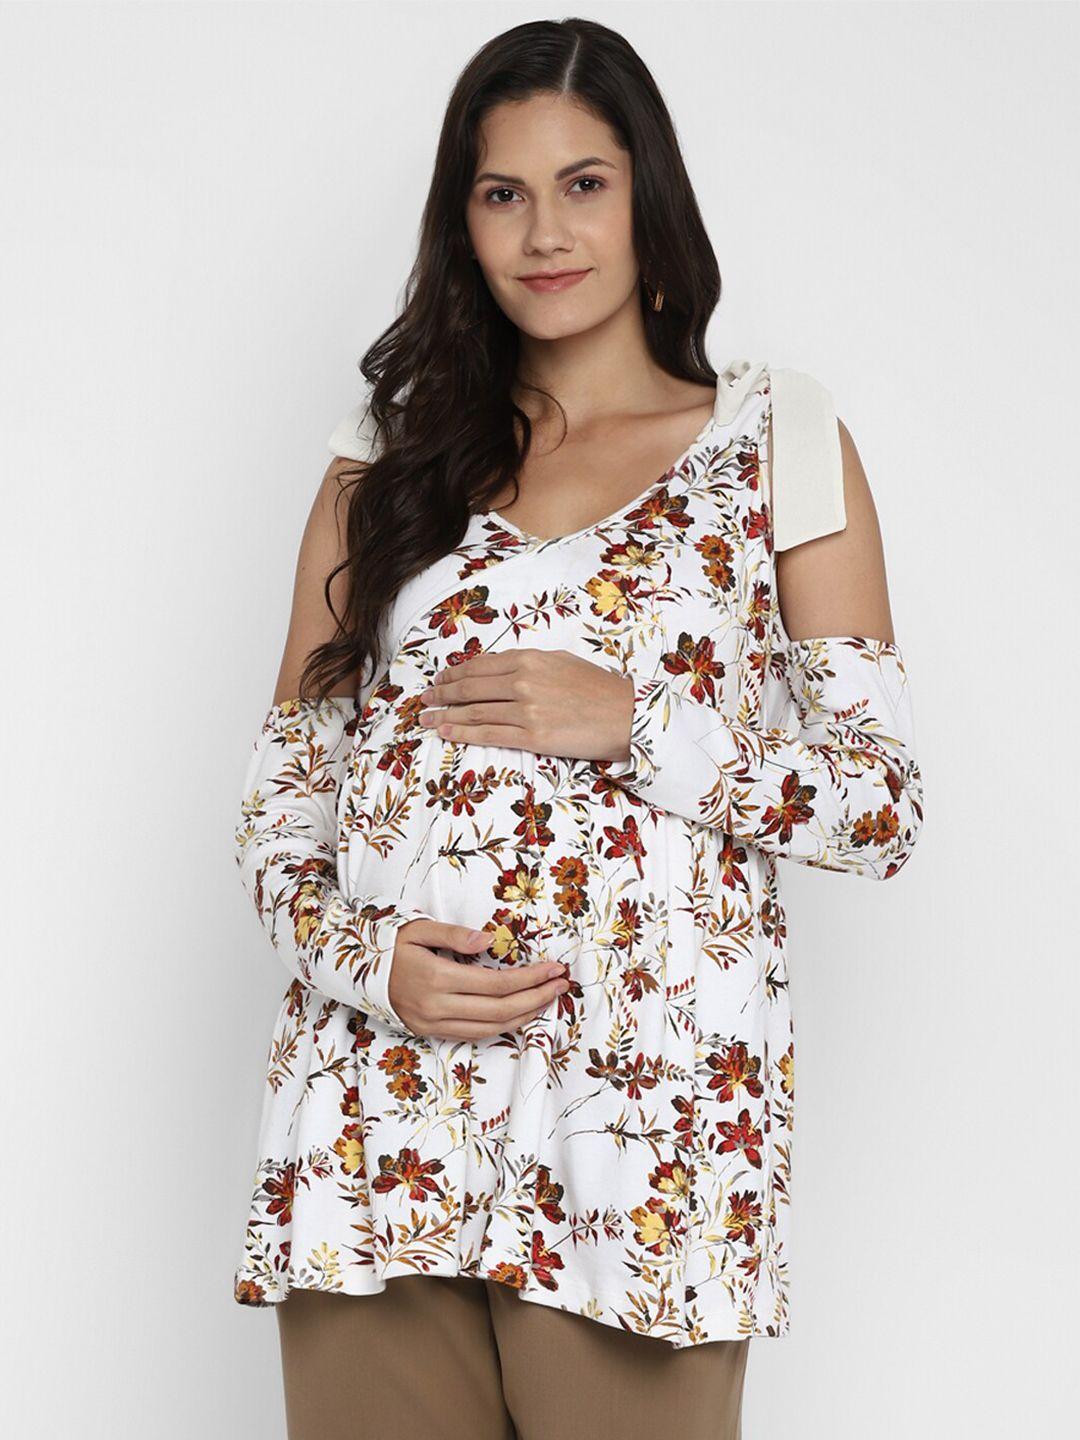 momsoon maternity women white floral print top